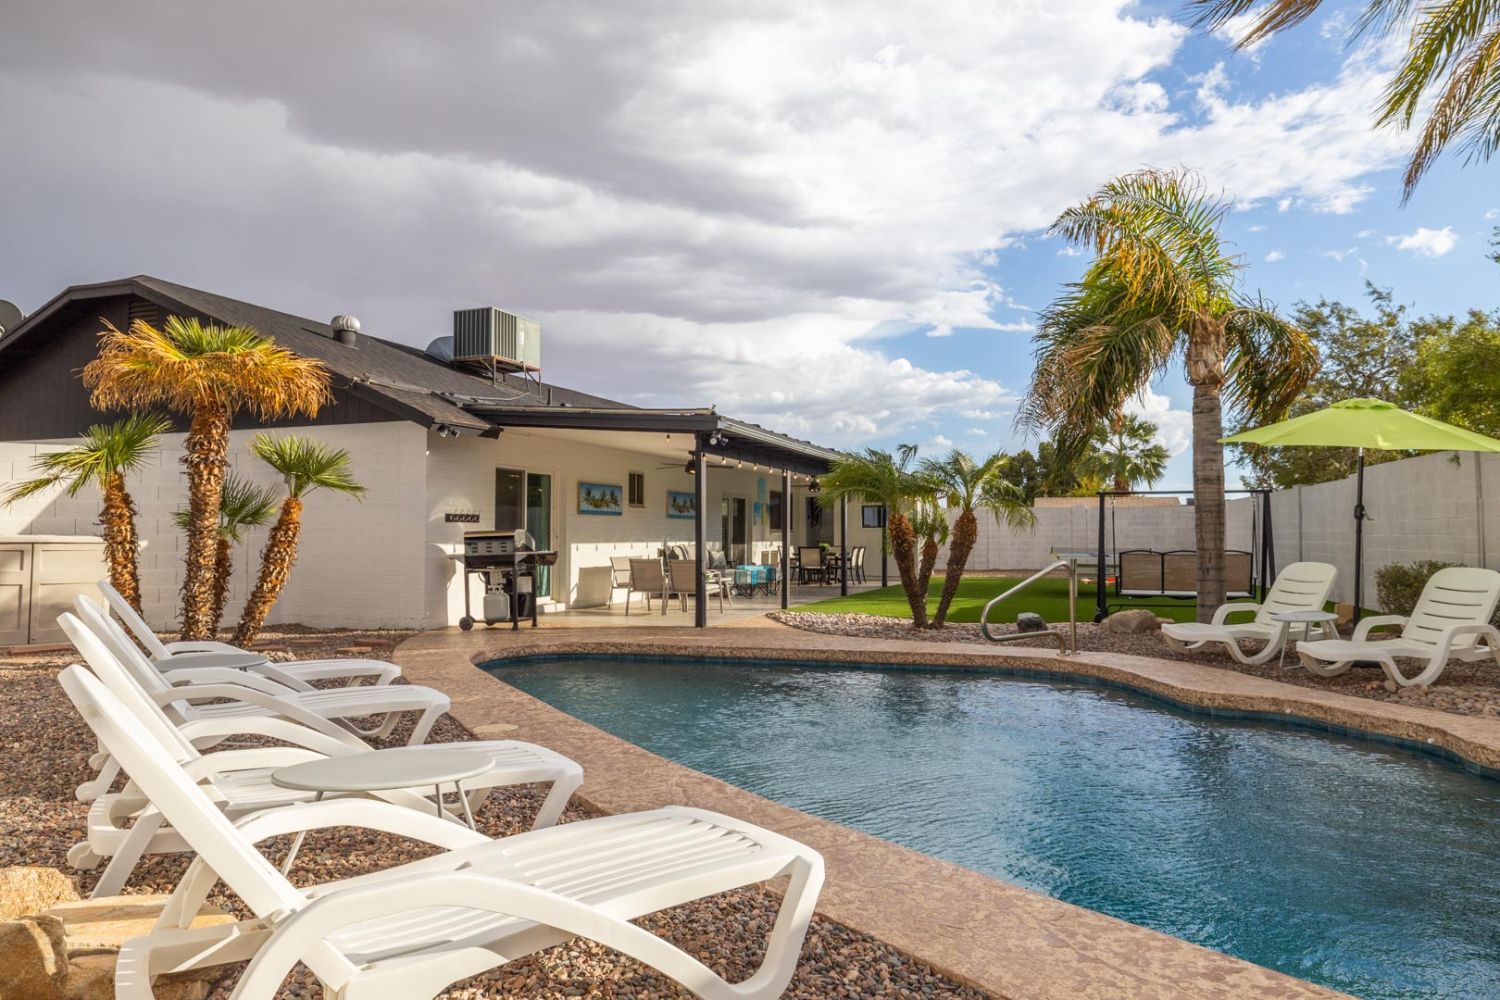 A private, backyard retreat w/ complimentary heated swimming pool - 